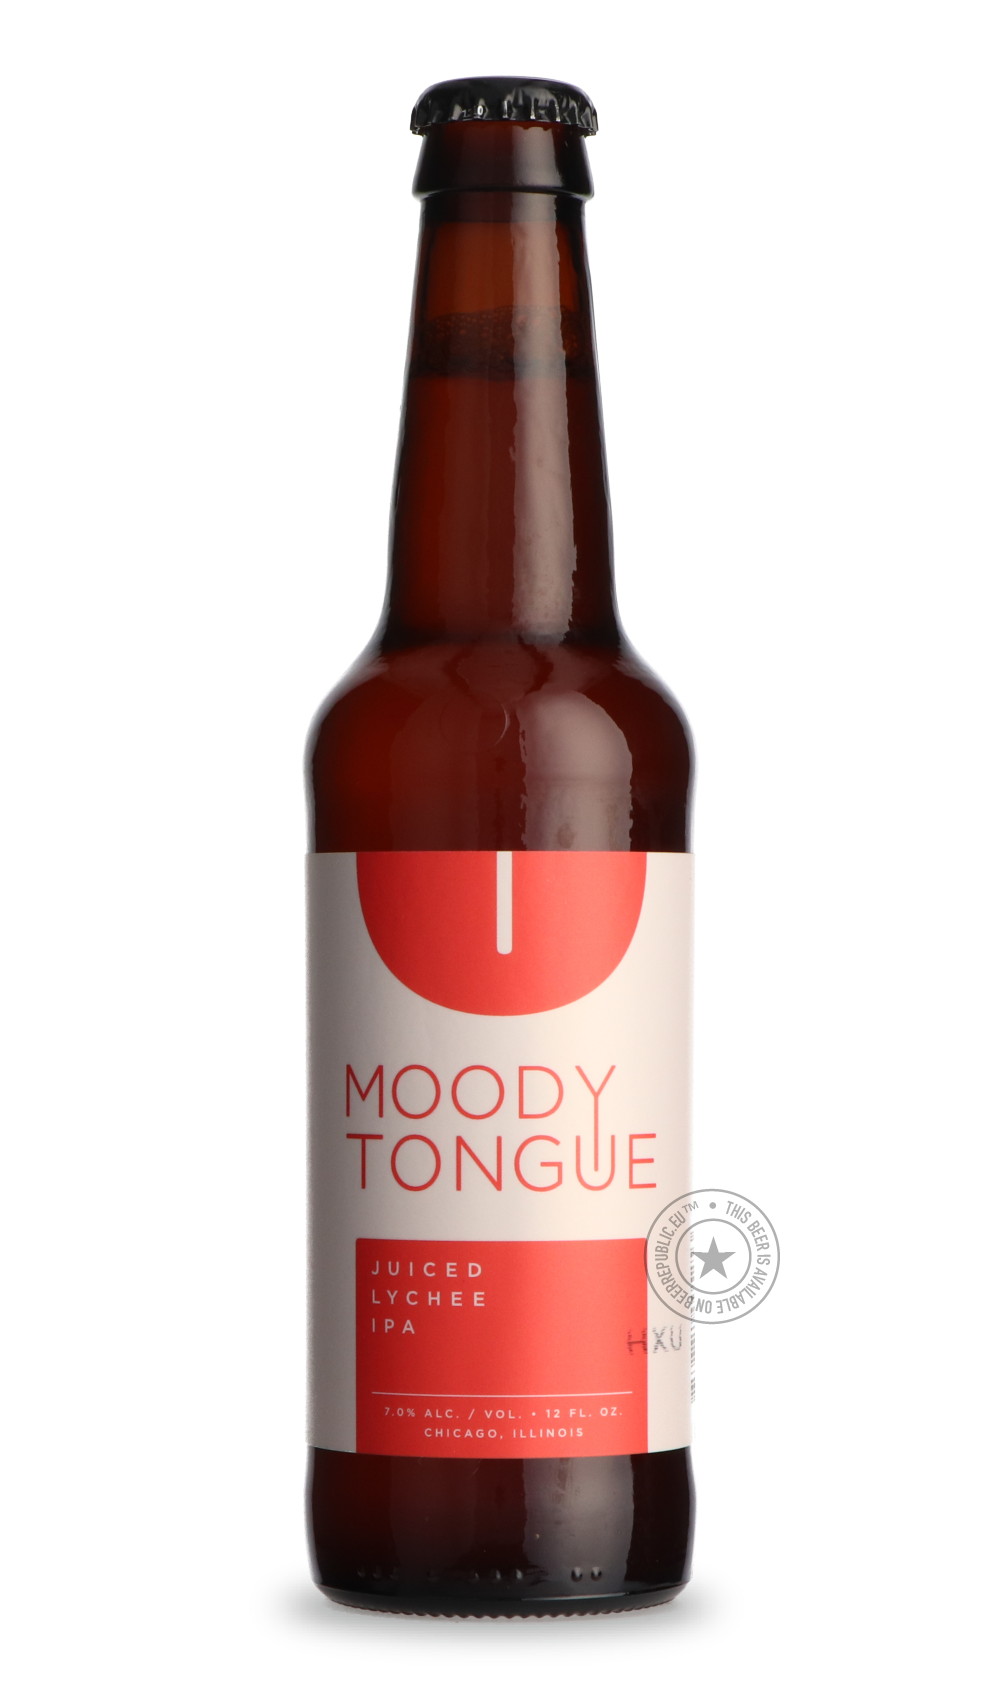 -Moody Tongue- Juiced Lychee IPA-IPA- Only @ Beer Republic - The best online beer store for American & Canadian craft beer - Buy beer online from the USA and Canada - Bier online kopen - Amerikaans bier kopen - Craft beer store - Craft beer kopen - Amerikanisch bier kaufen - Bier online kaufen - Acheter biere online - IPA - Stout - Porter - New England IPA - Hazy IPA - Imperial Stout - Barrel Aged - Barrel Aged Imperial Stout - Brown - Dark beer - Blond - Blonde - Pilsner - Lager - Wheat - Weizen - Amber - 